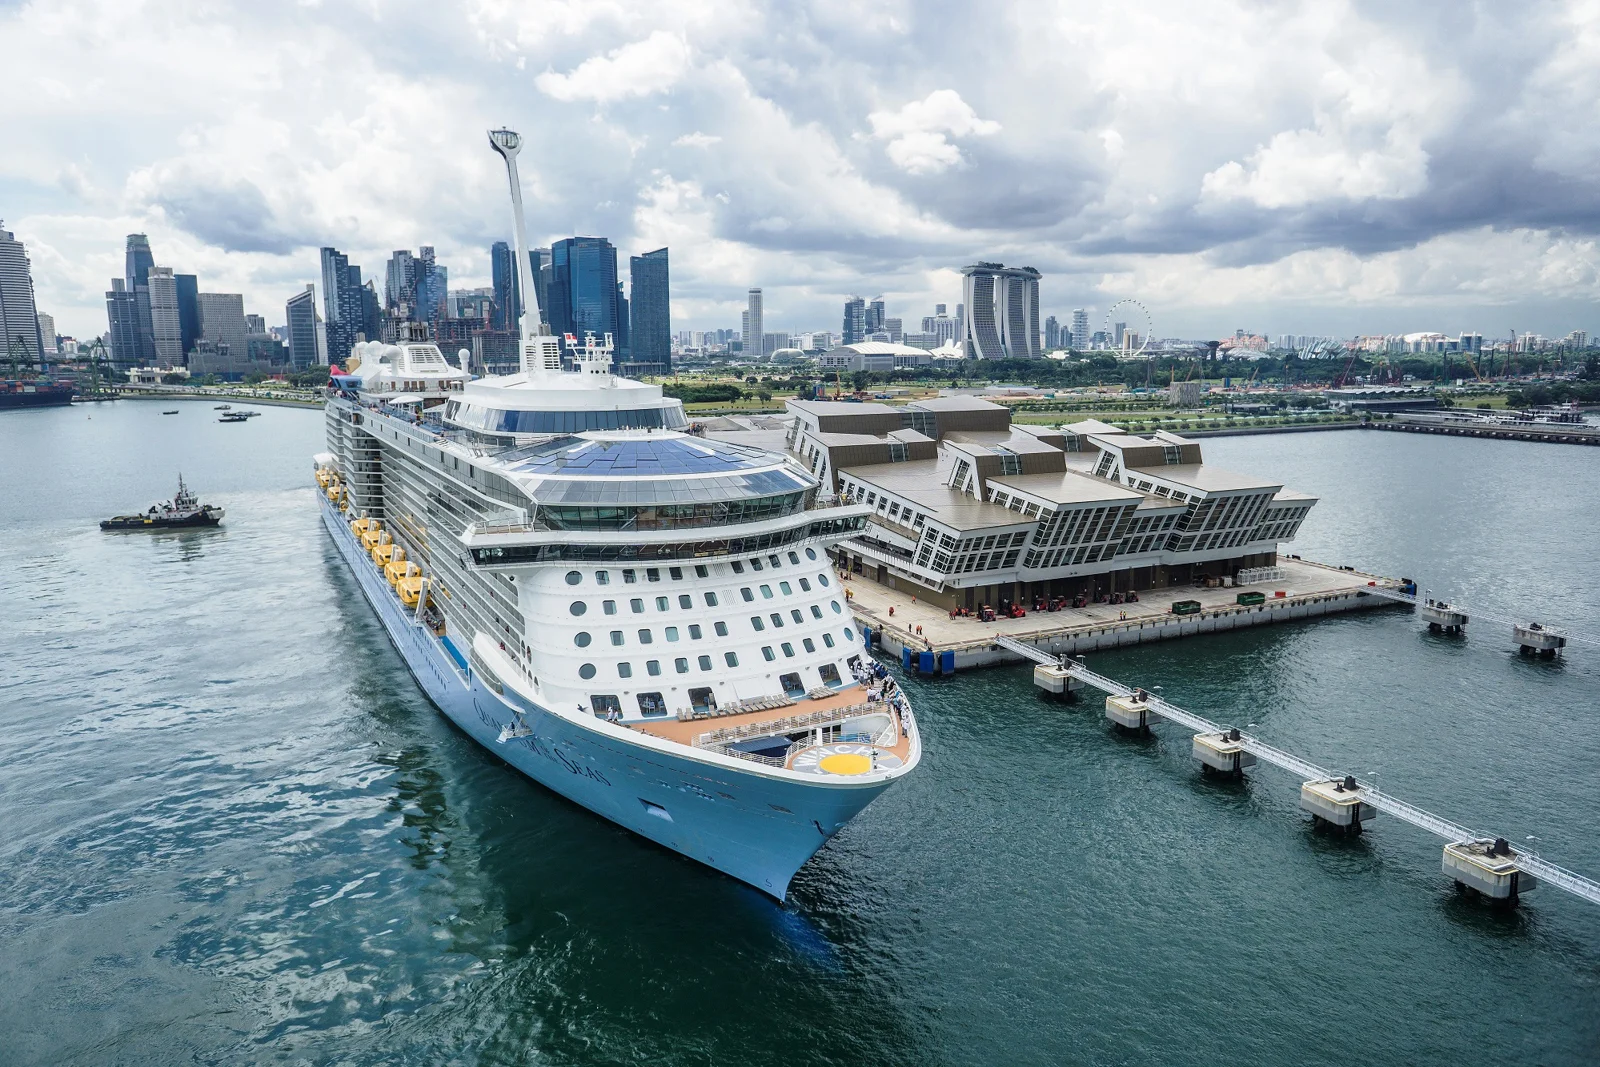 Royal Caribbean is the newest cruise line to reduce service levels on ships.